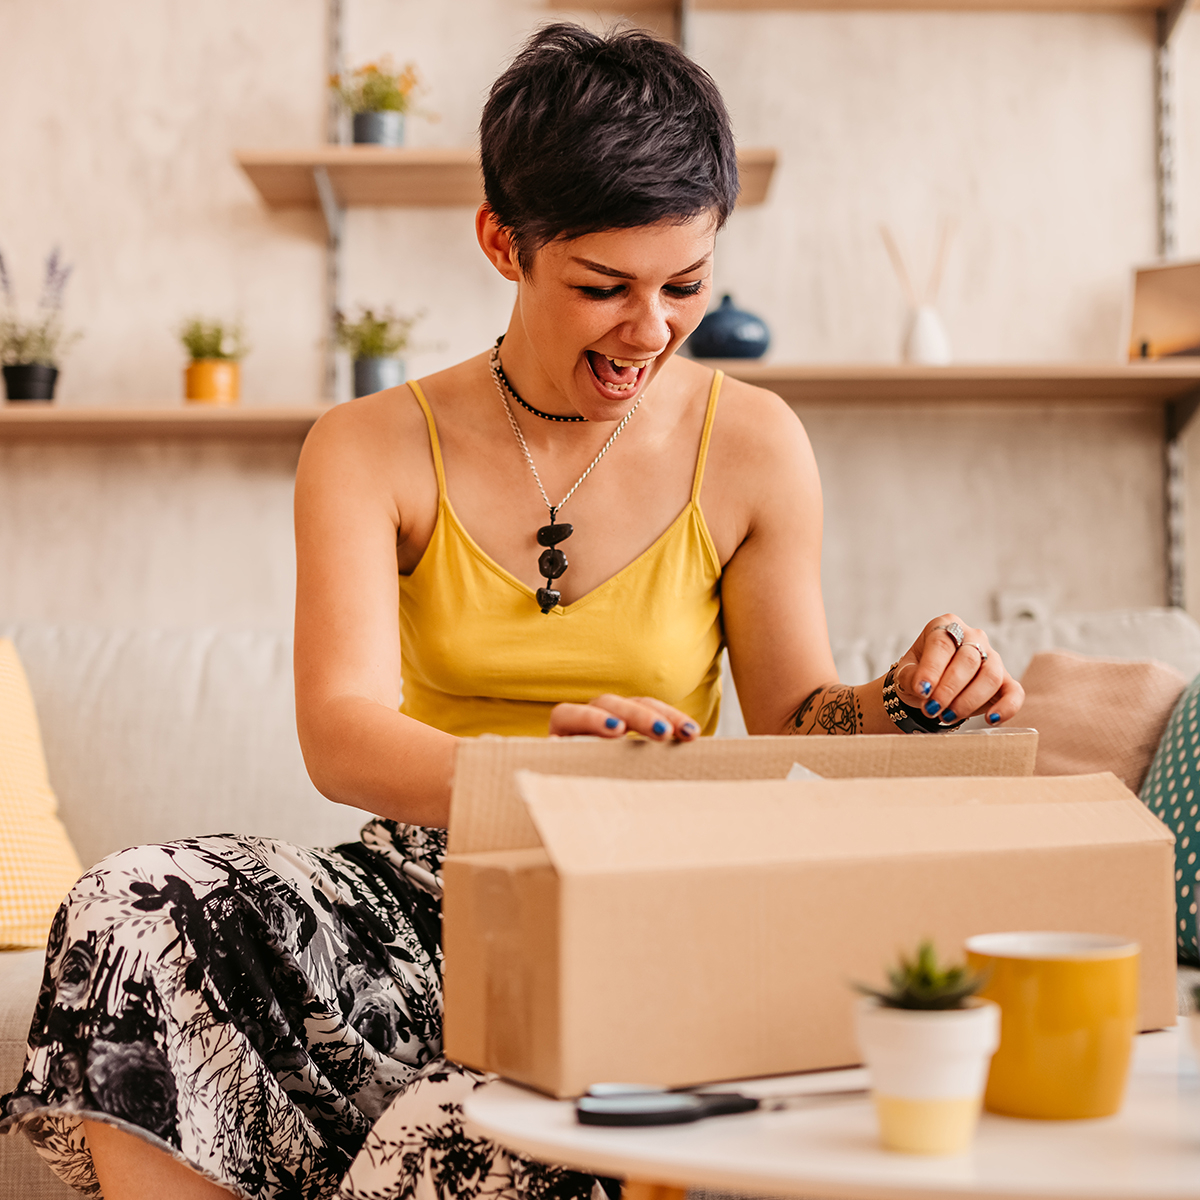 These 15 Sites With Fast Shipping Are Perfect for Last-Minute Shopping